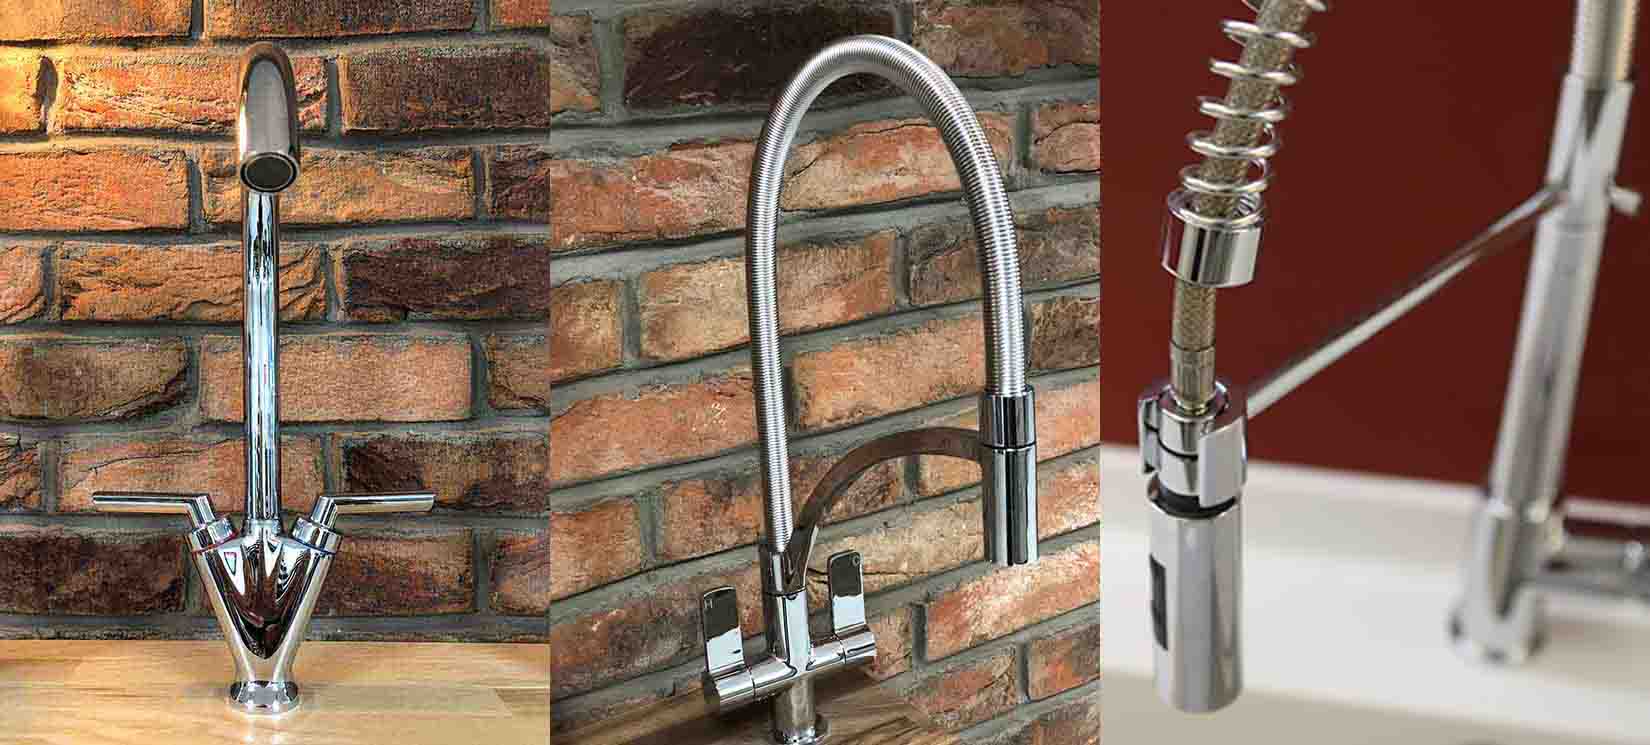 Types of tap spout - swivel, pull-out spray and spring neck taps